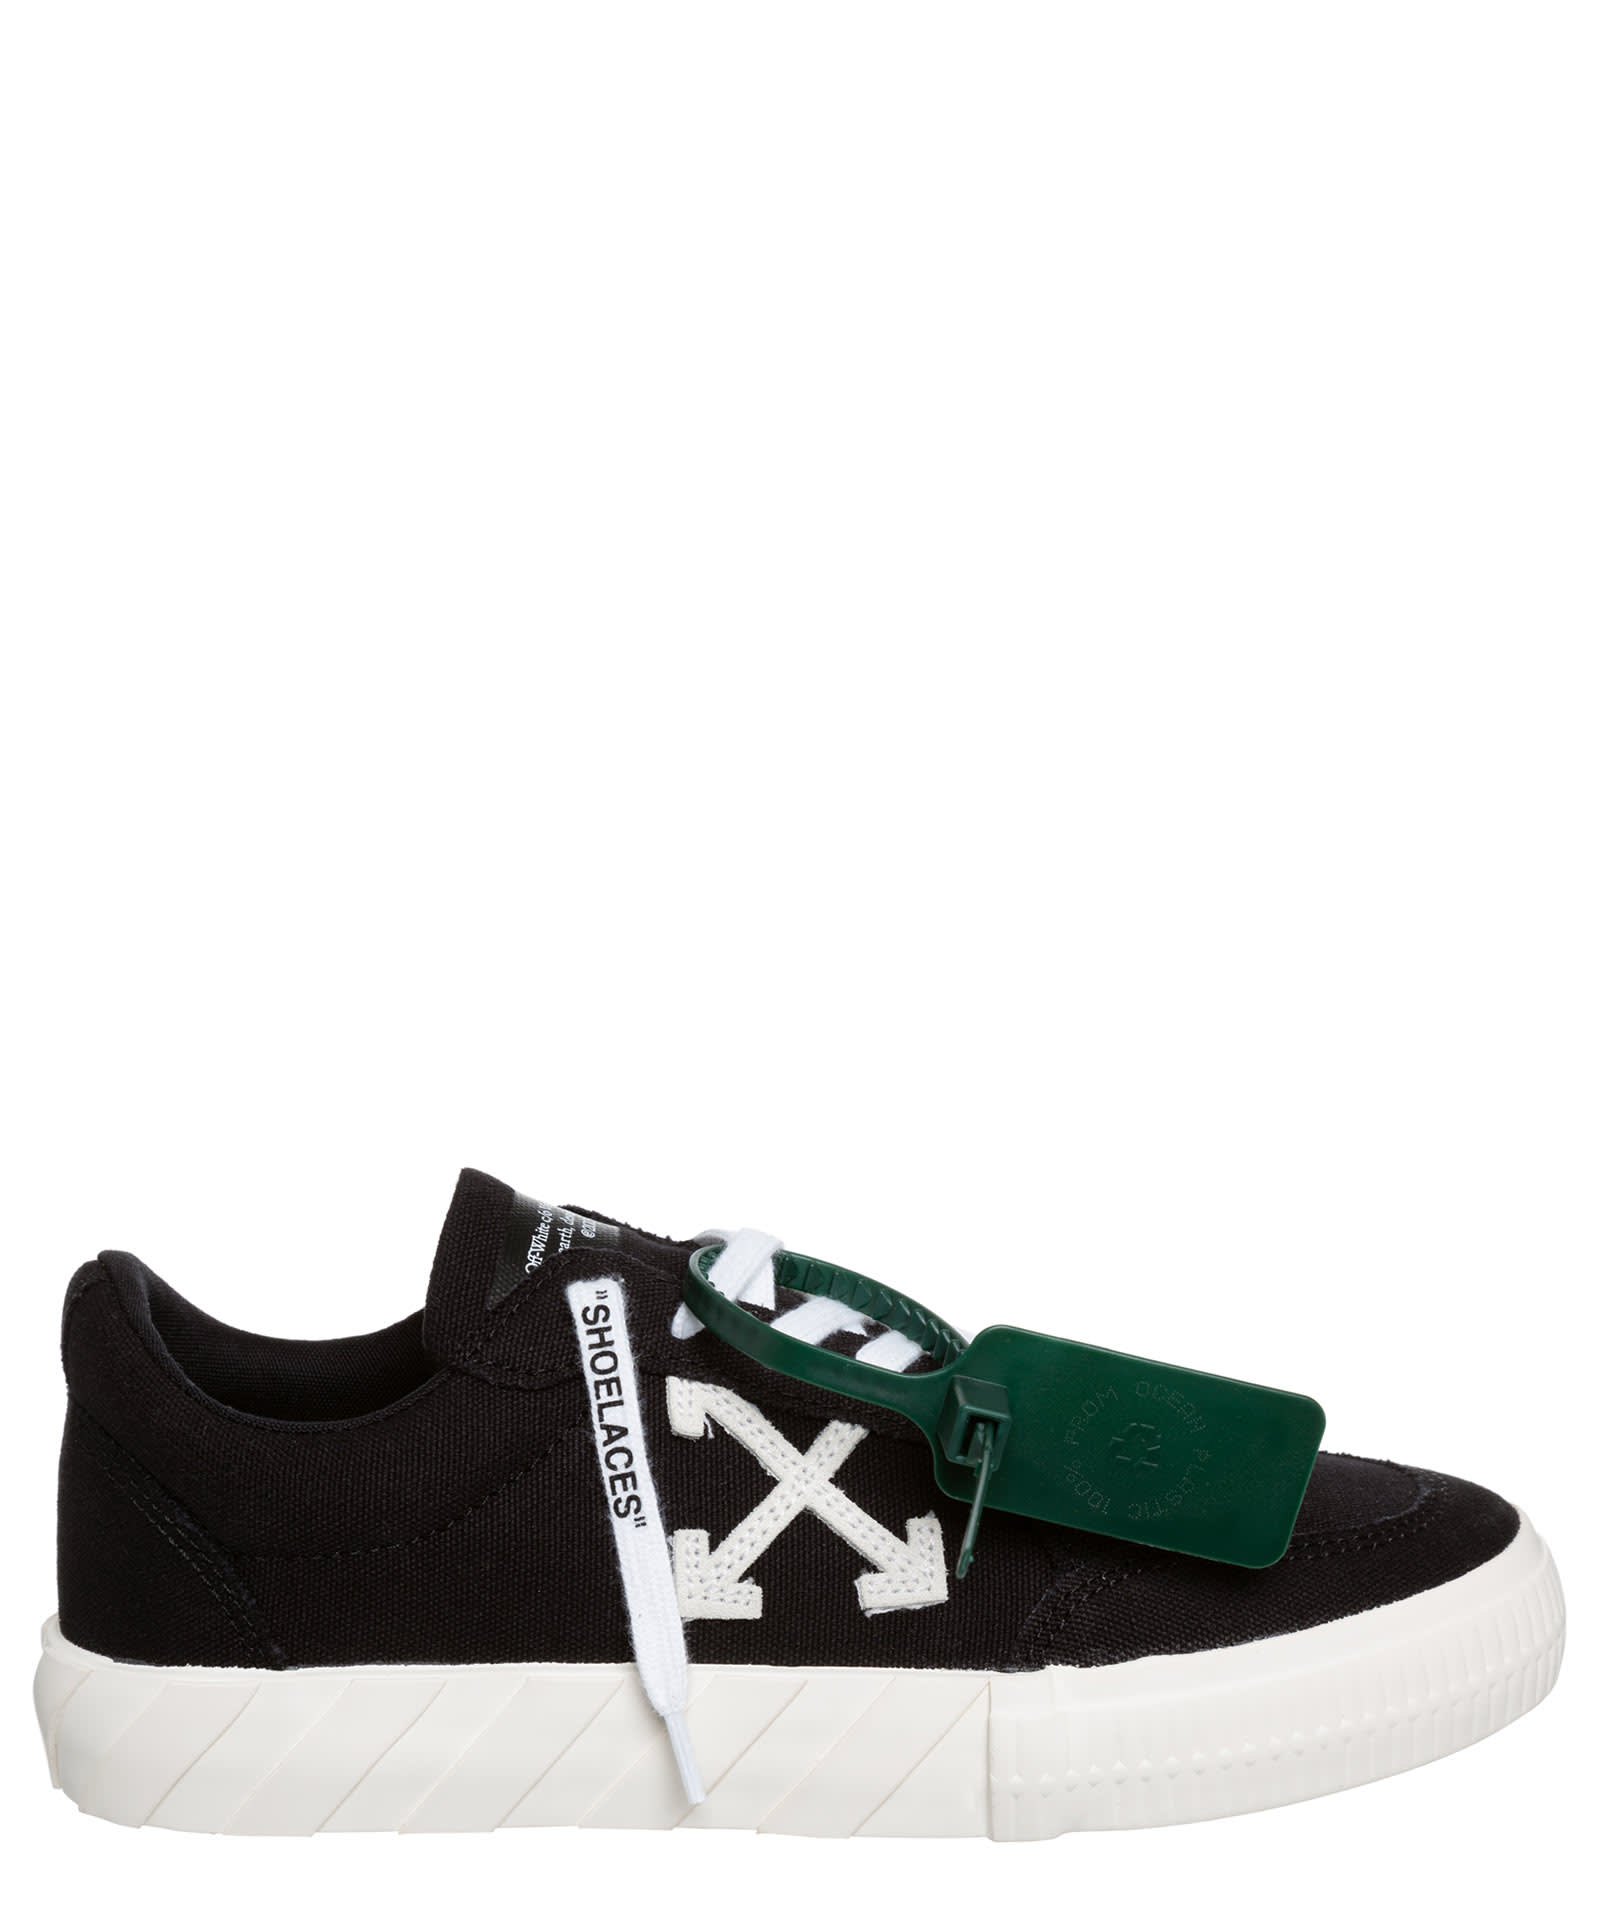 Off-White Vulcanized Cotton Sneakers